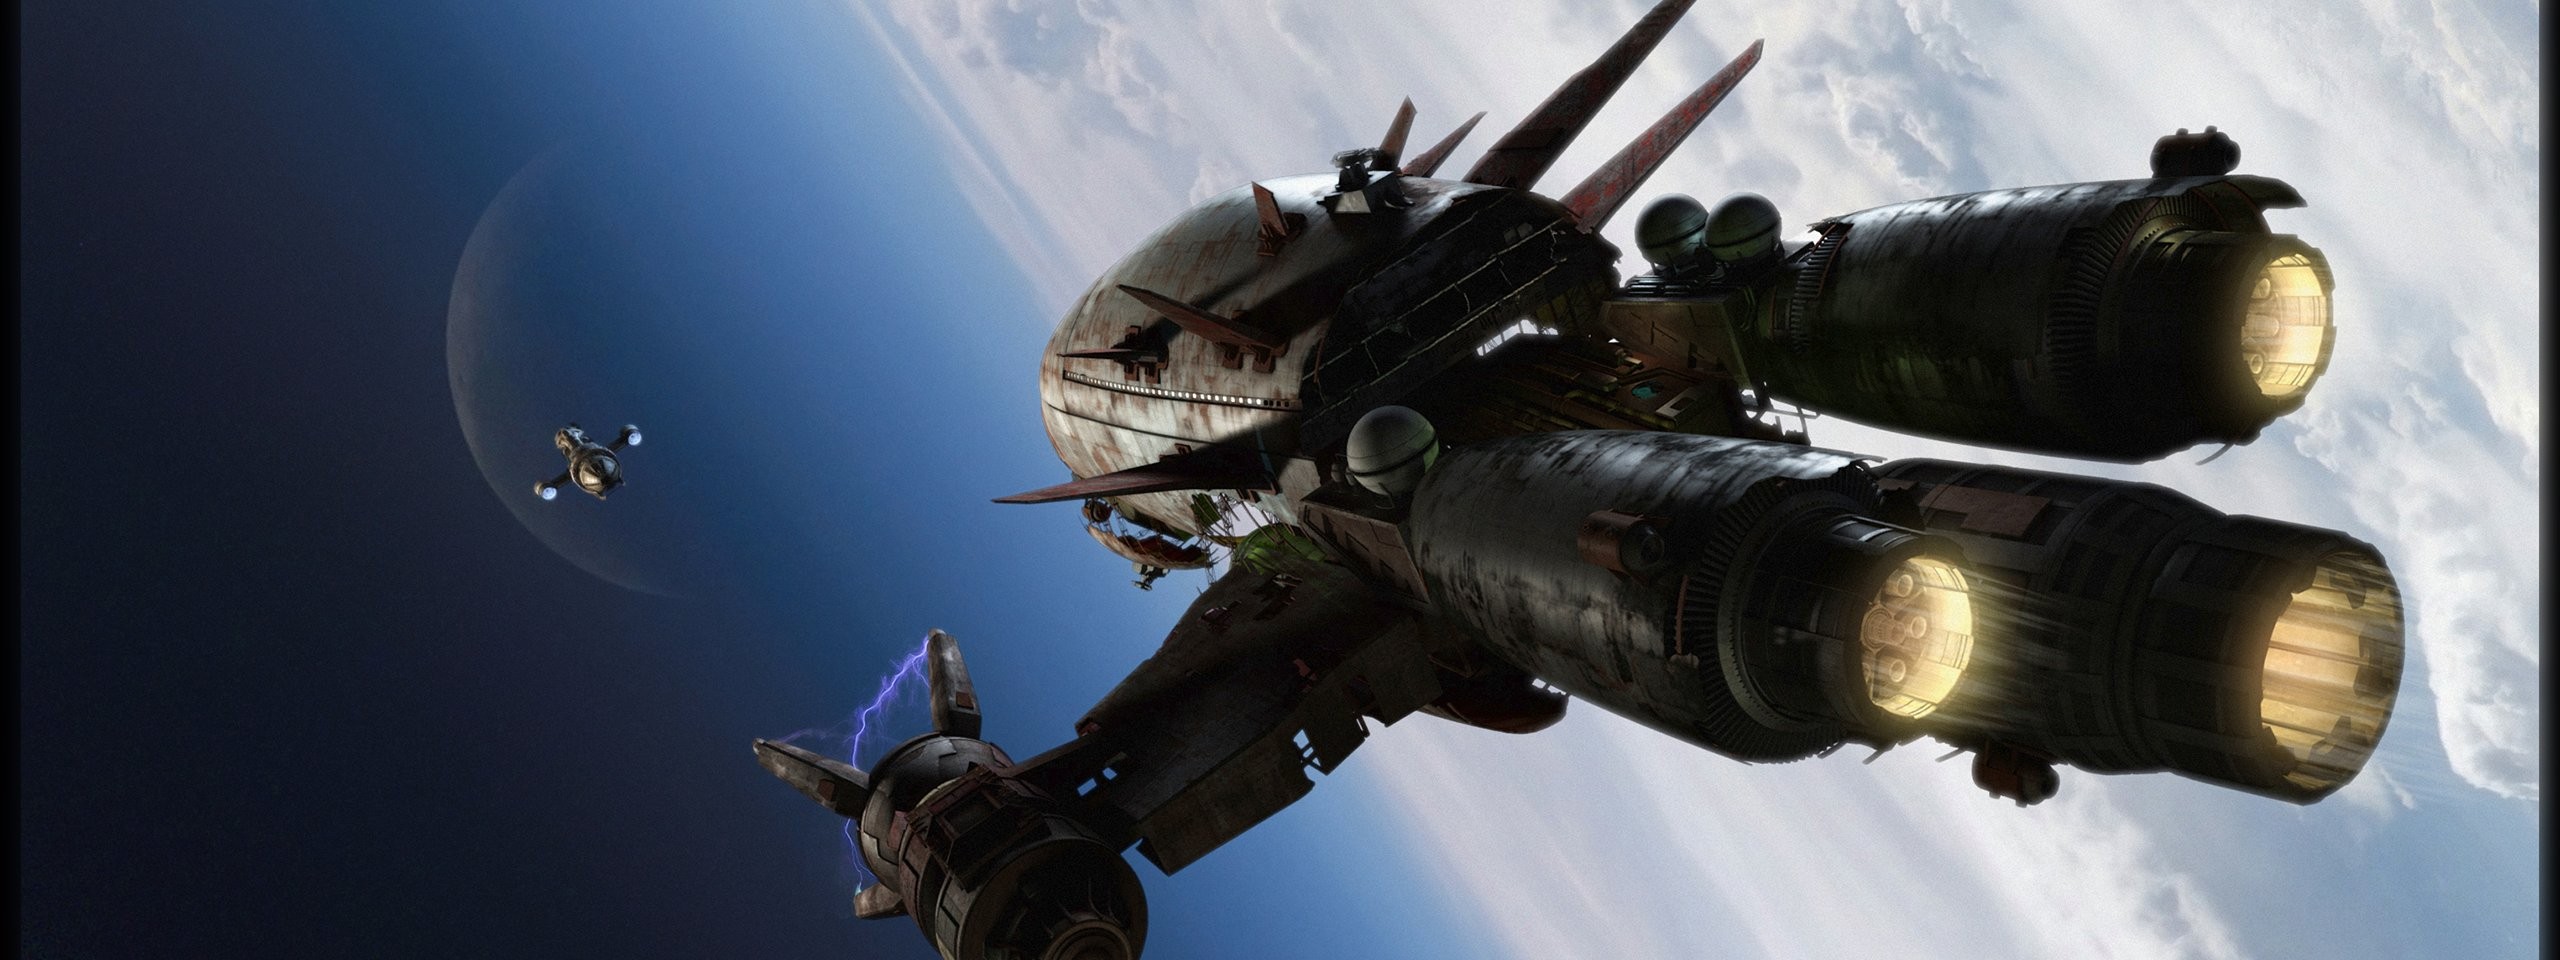 General 2560x960 Firefly TV series spaceship science fiction